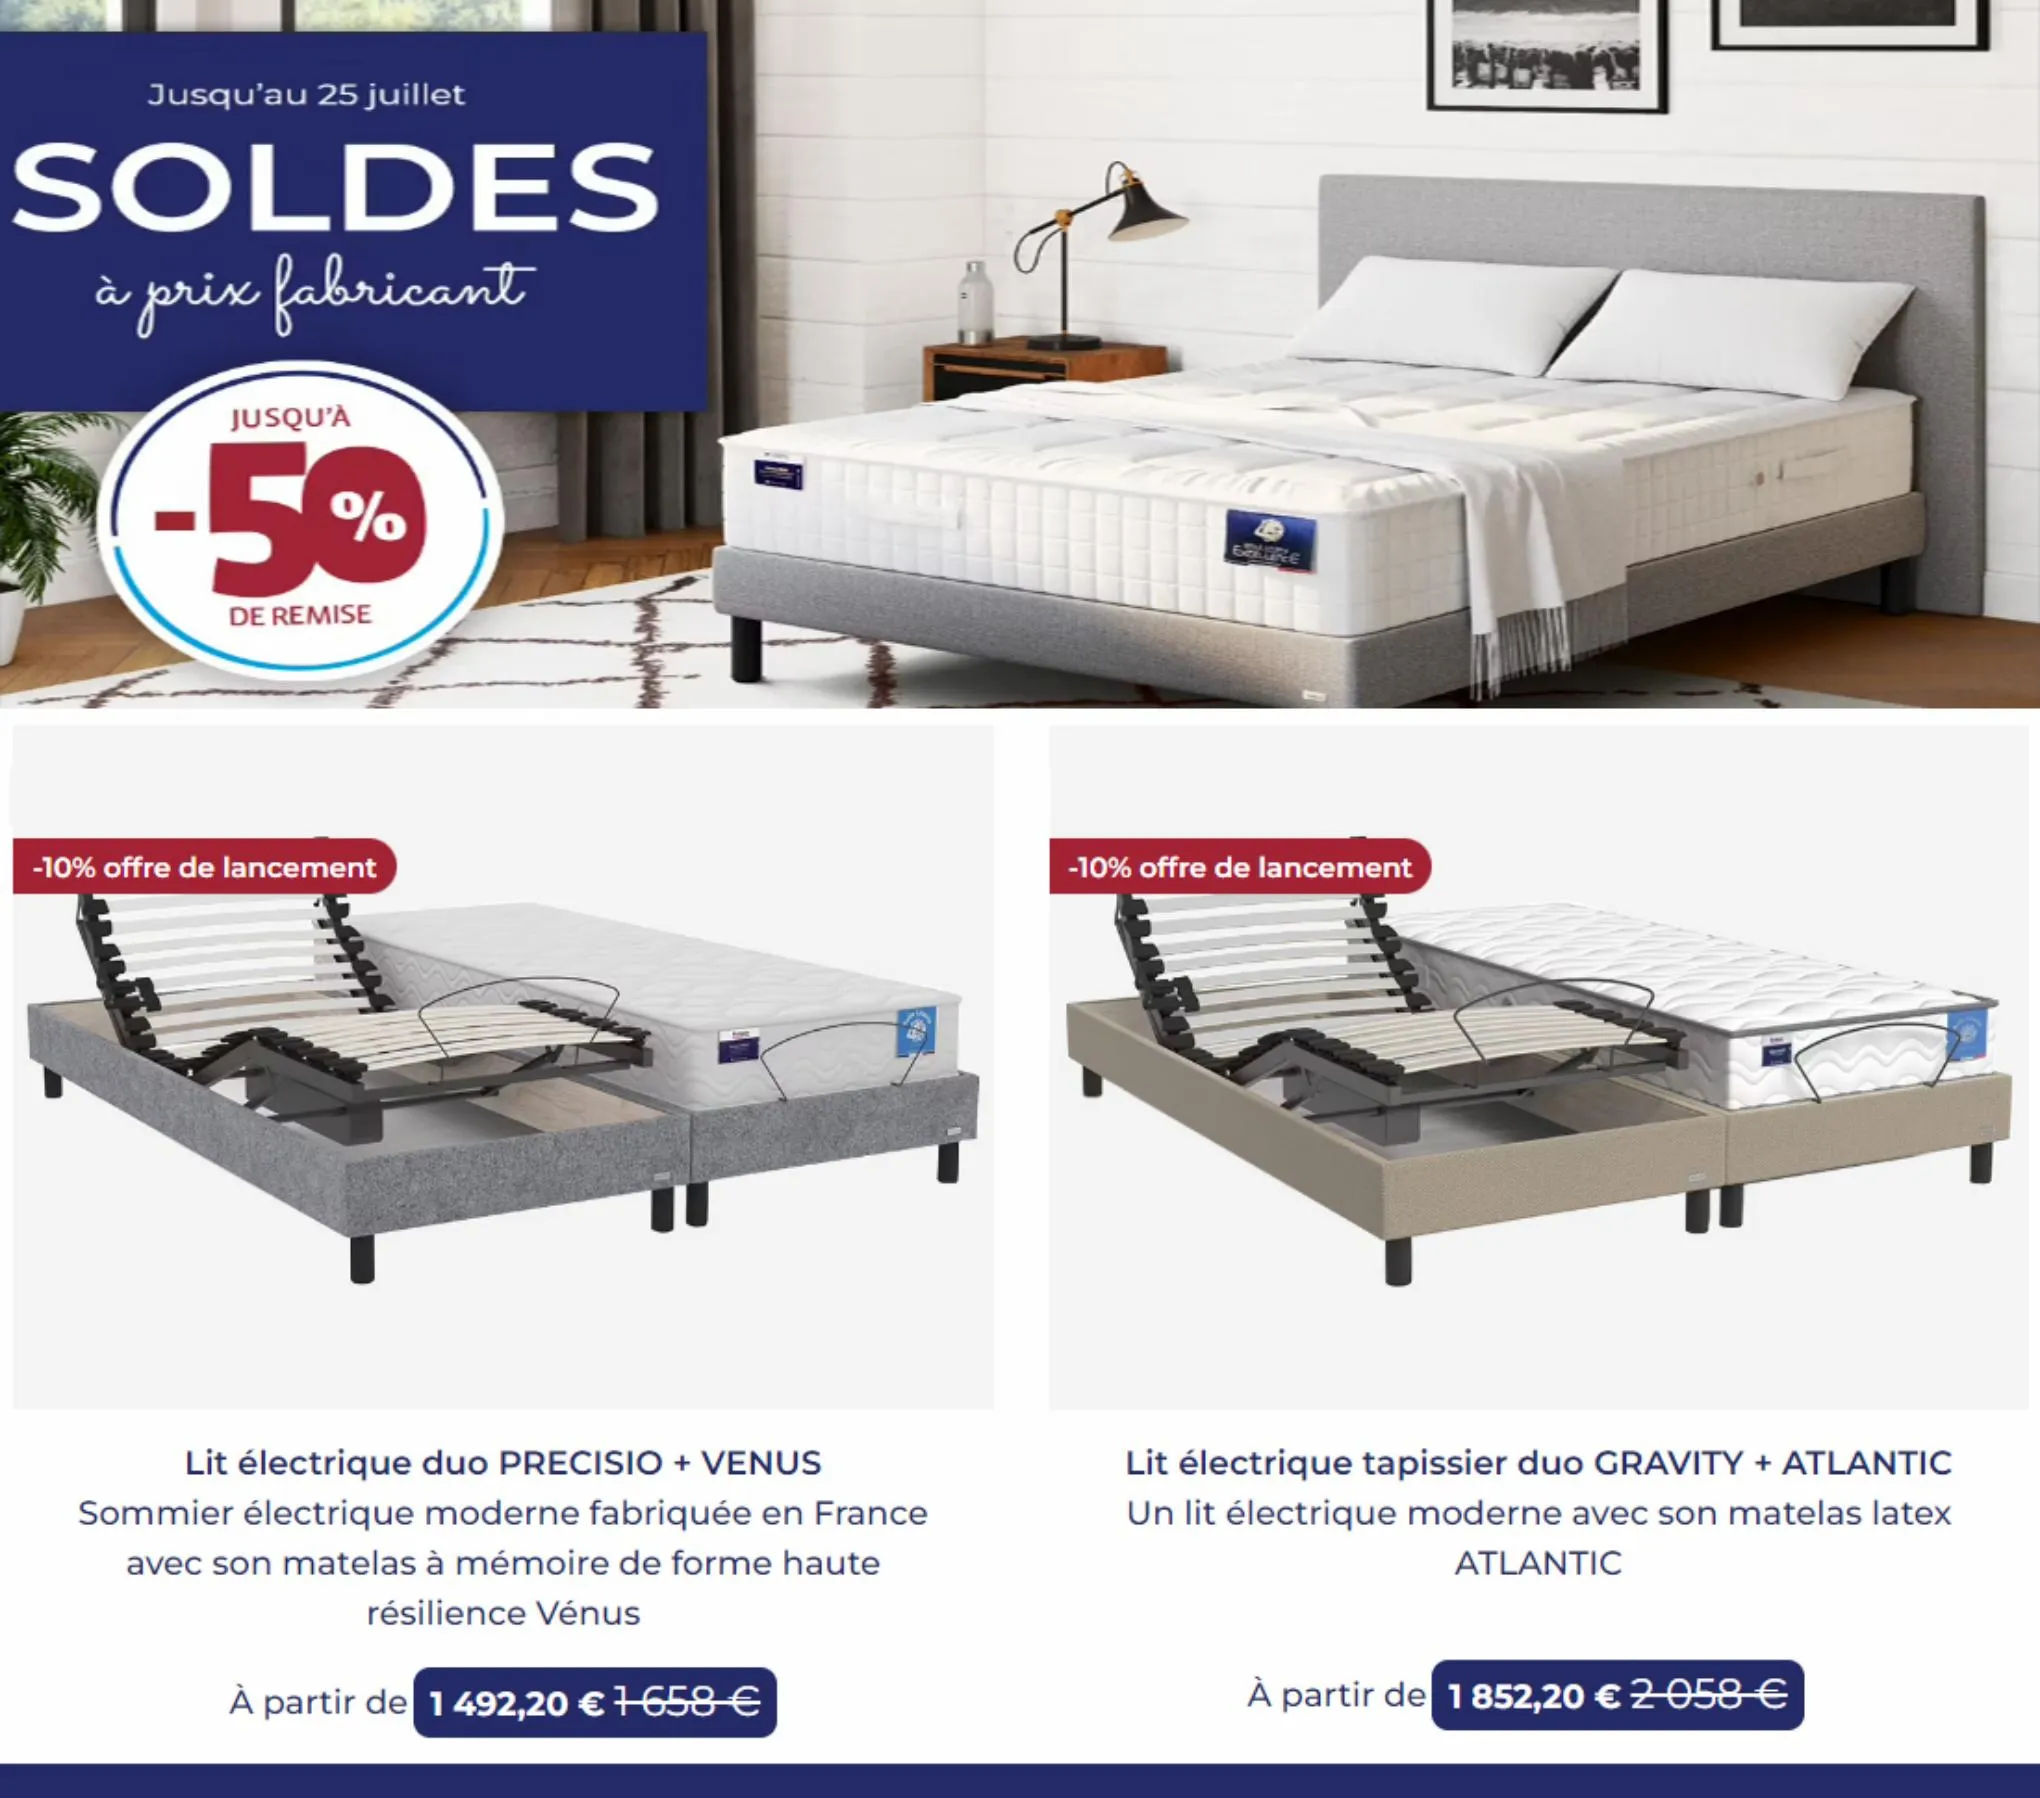 Catalogue Soldes a prix fabricant, page 00005